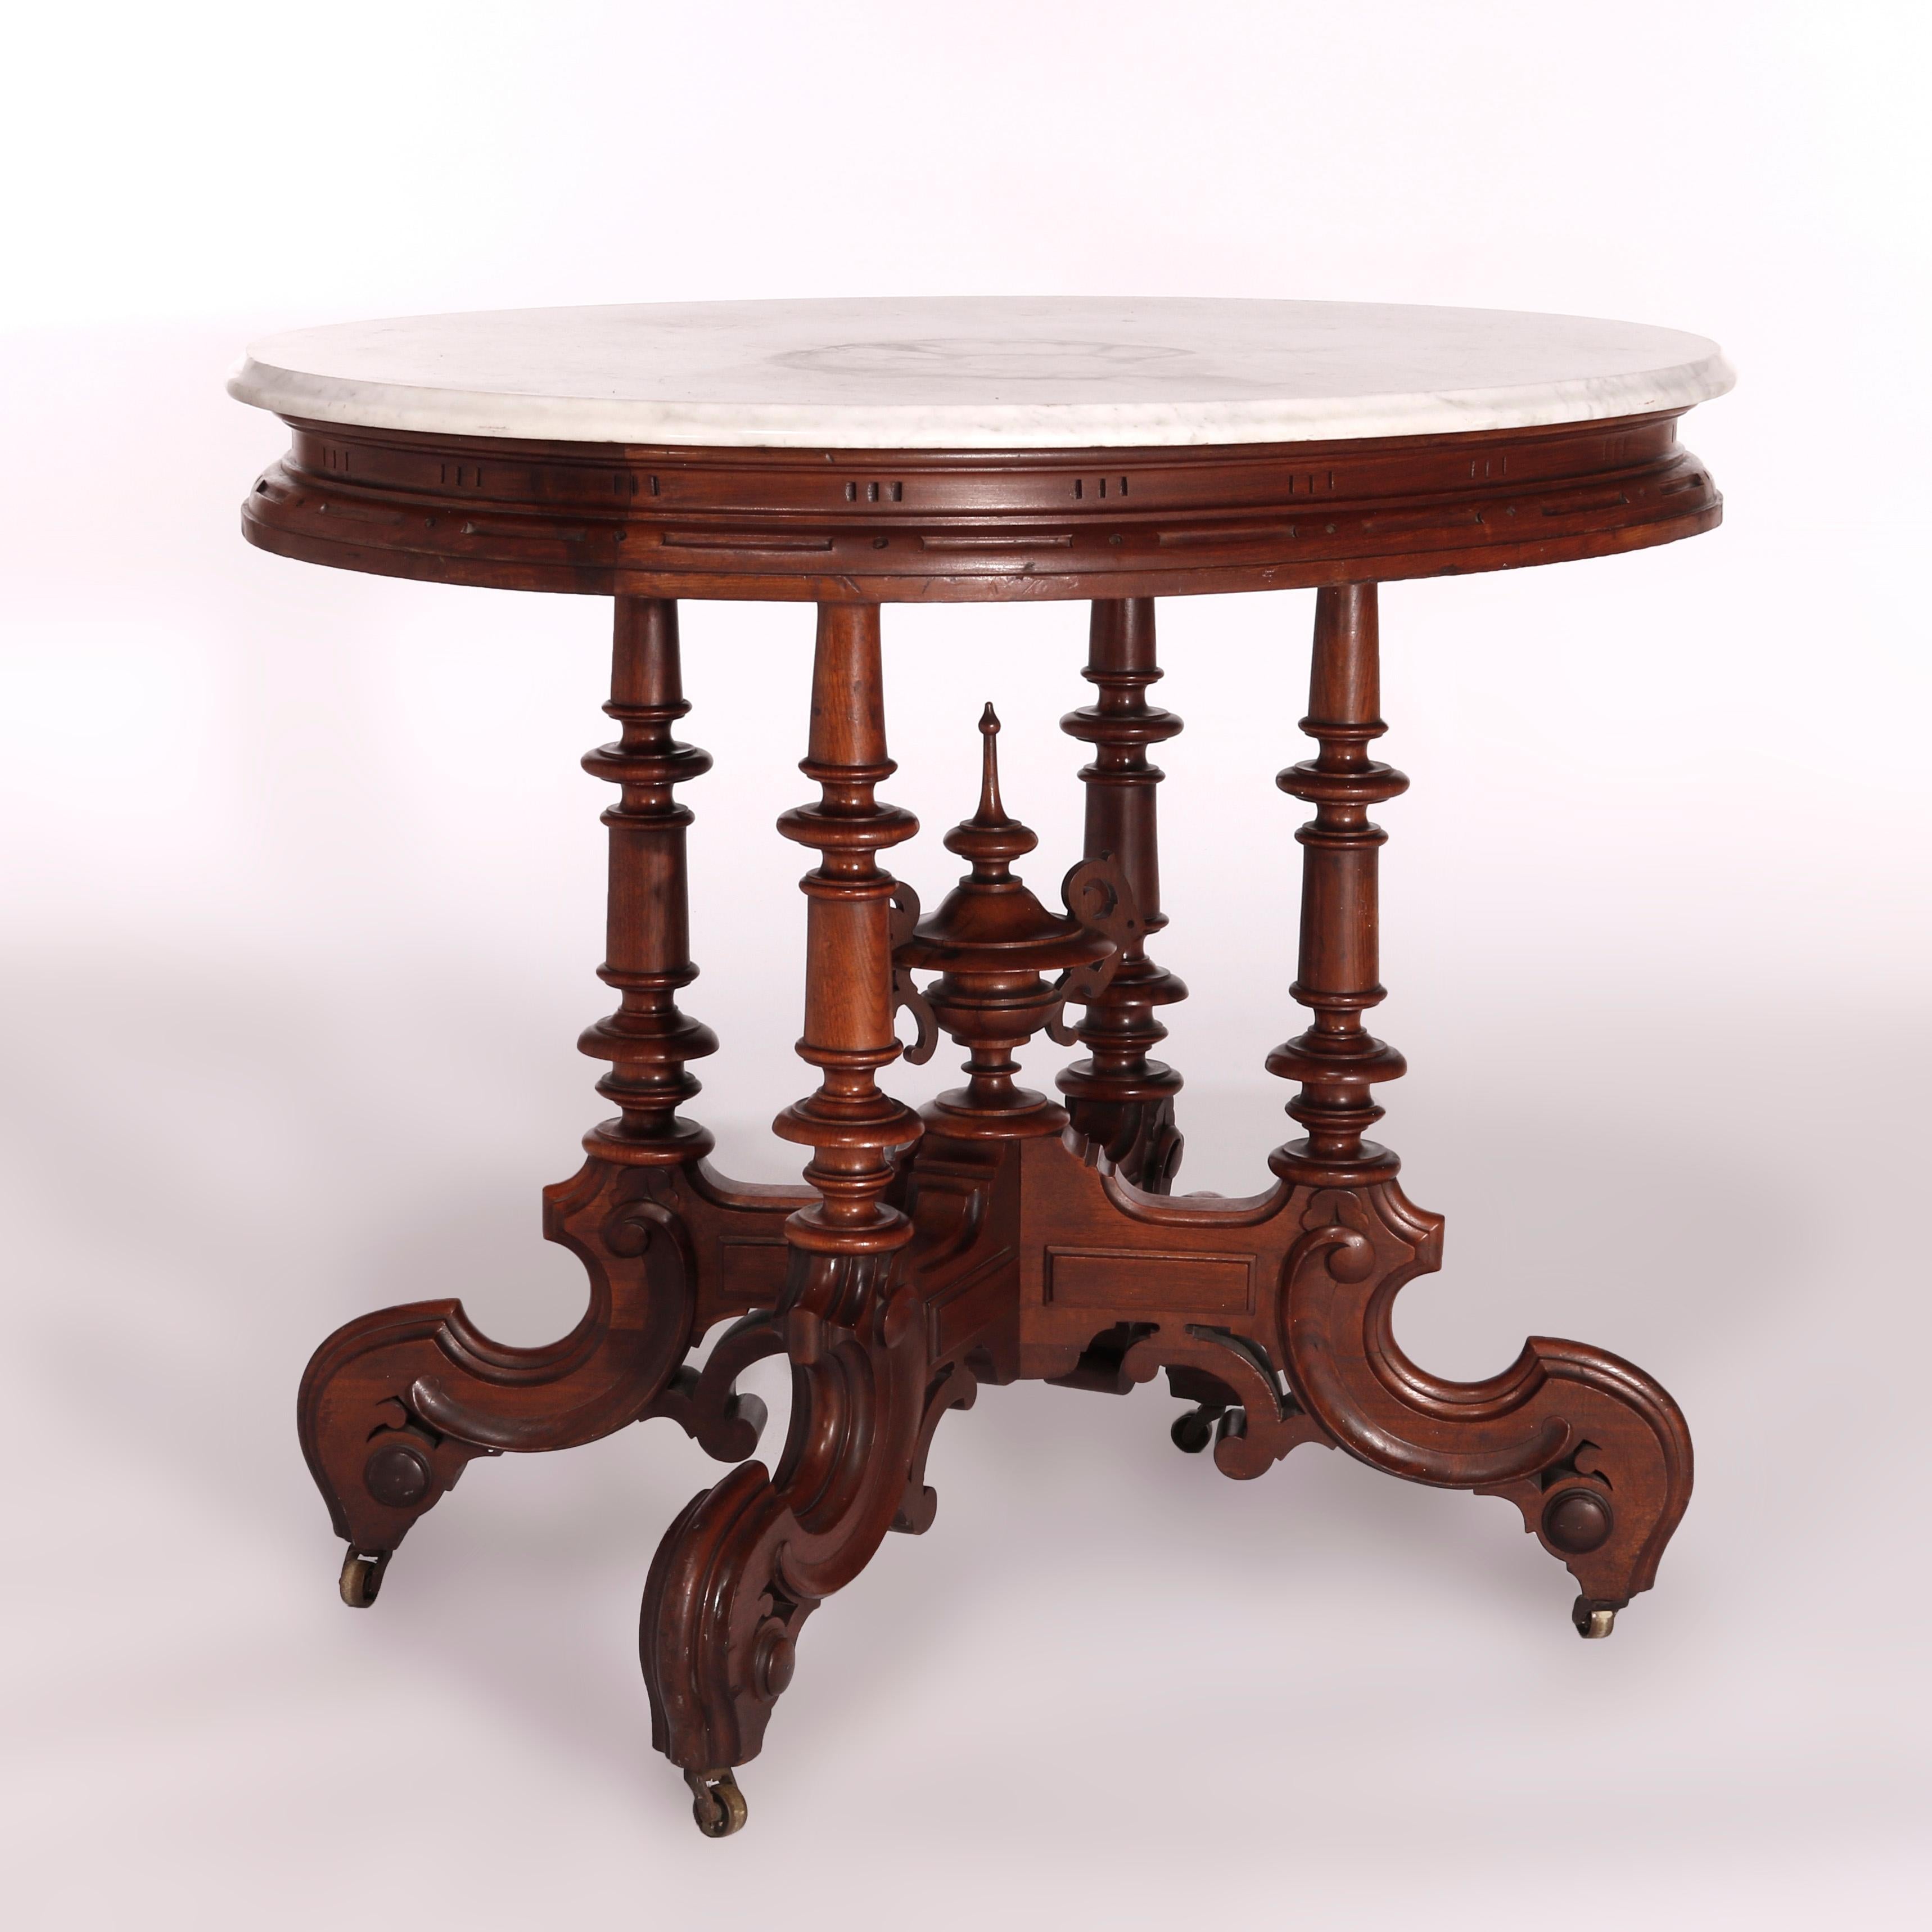 Antique Victorian Brooks Brothers Walnut & Marble Parlor Table, circa 1890 For Sale 7